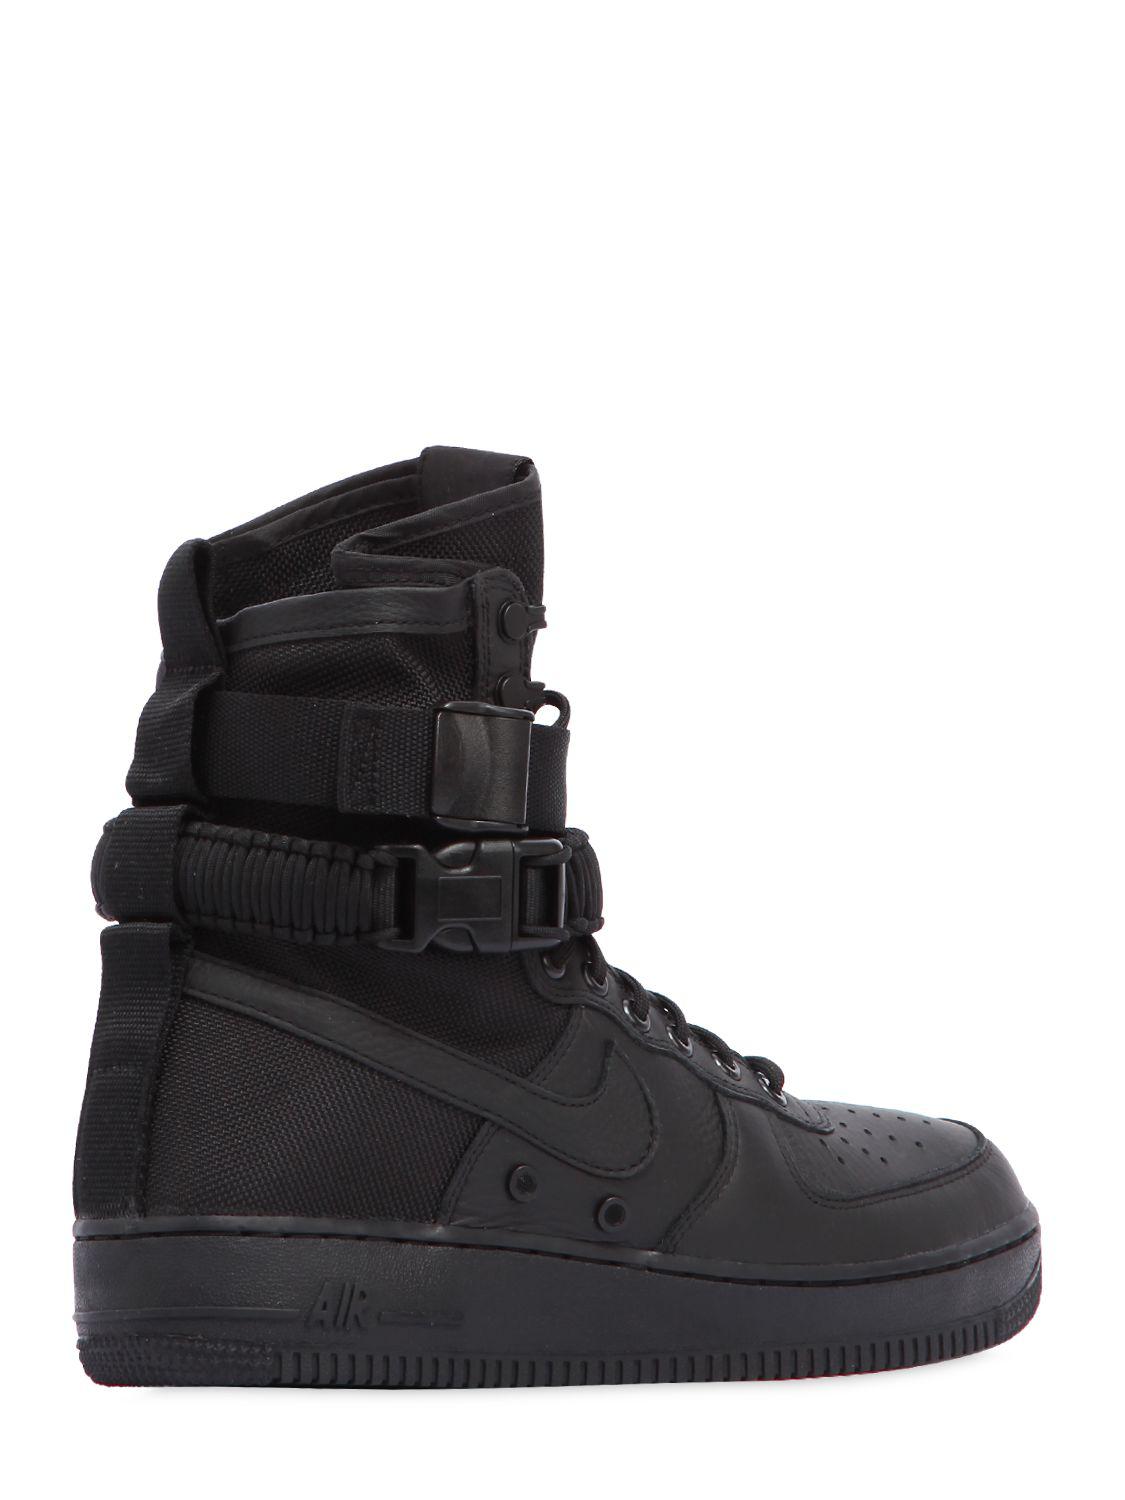 Nike Leather Sf Air Force 1 High Top Sneakers in Black for Men - Lyst